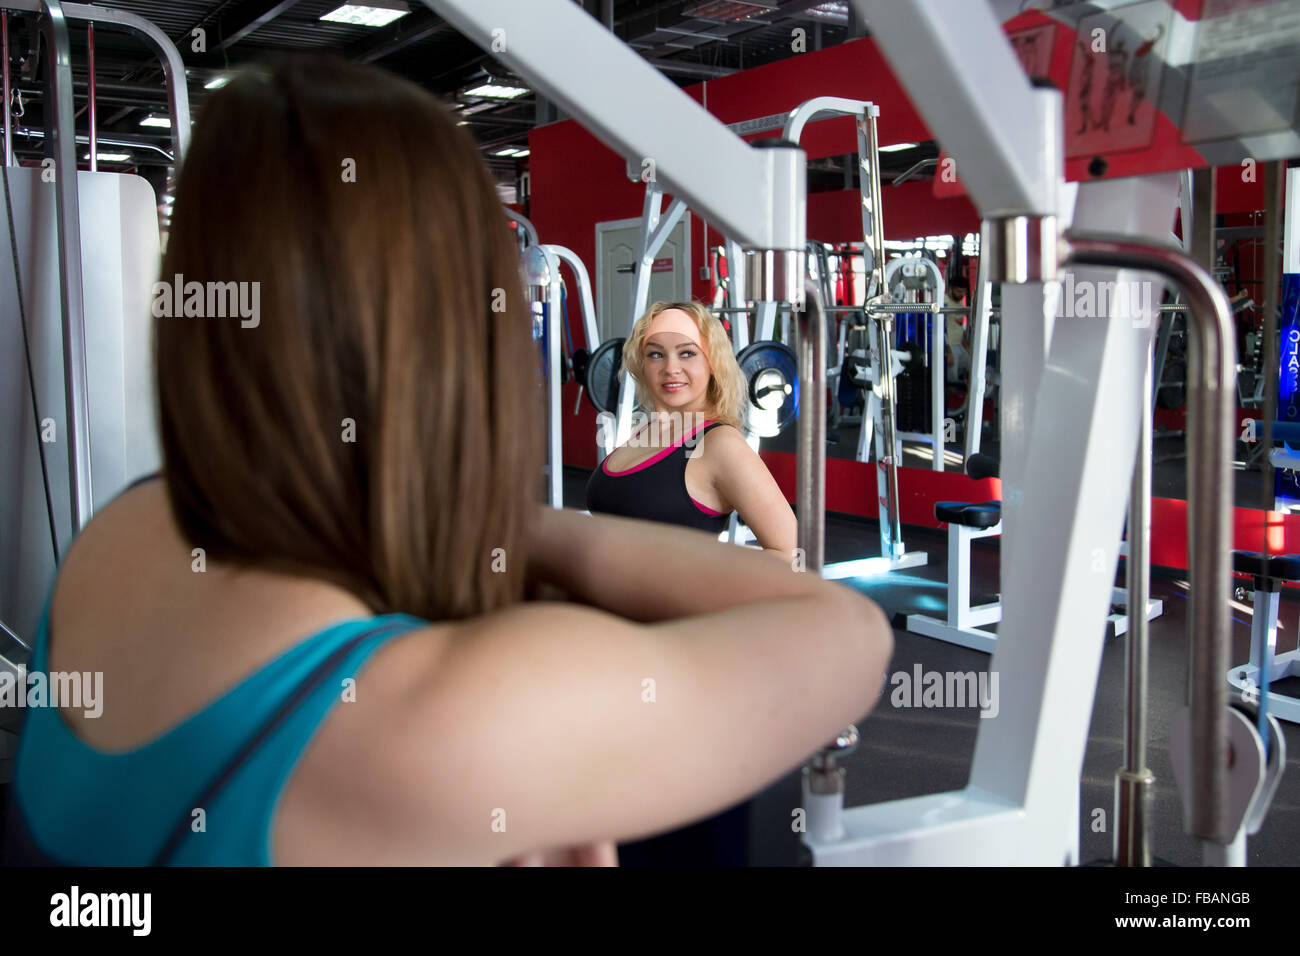 Two female bodybuilders in sportswear, one girl is exercising and another is watching her while resting Stock Photo